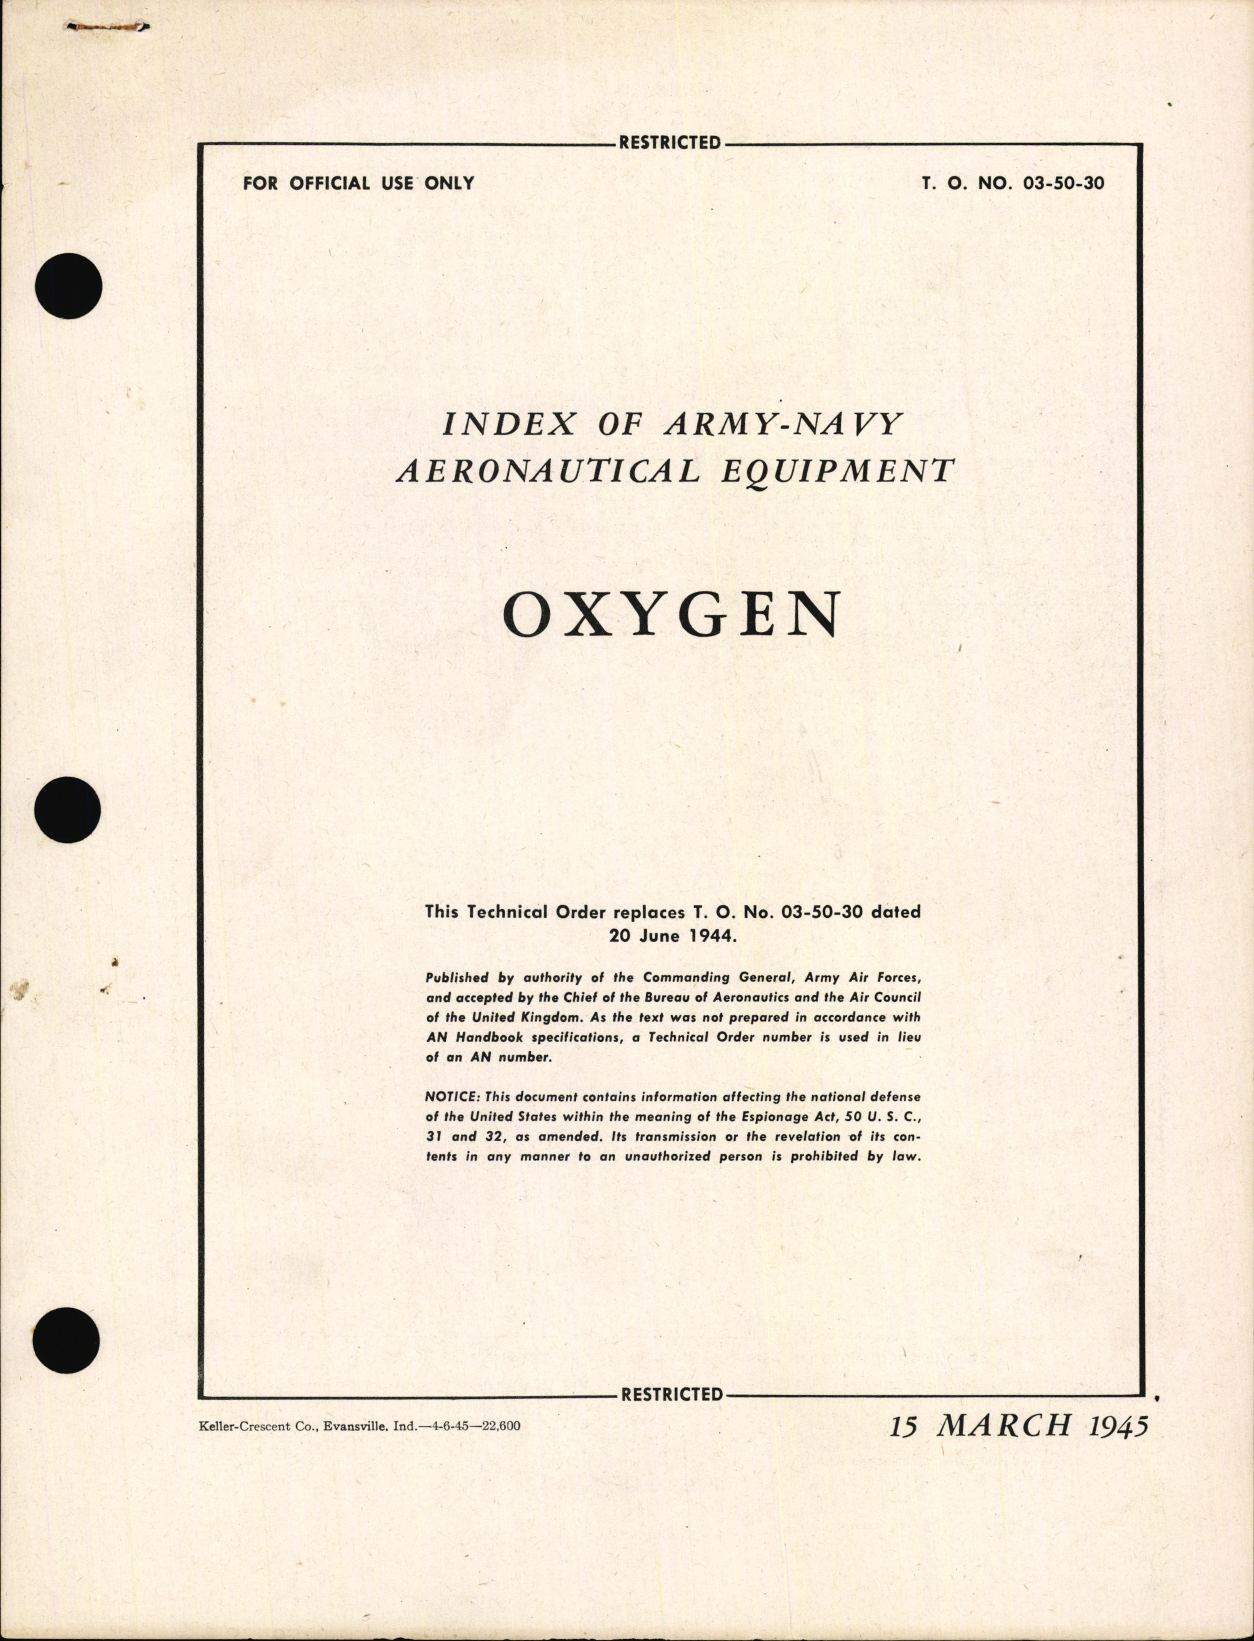 Sample page 1 from AirCorps Library document: Index of Army-Navy Aeronautical Equipment - Oxygen